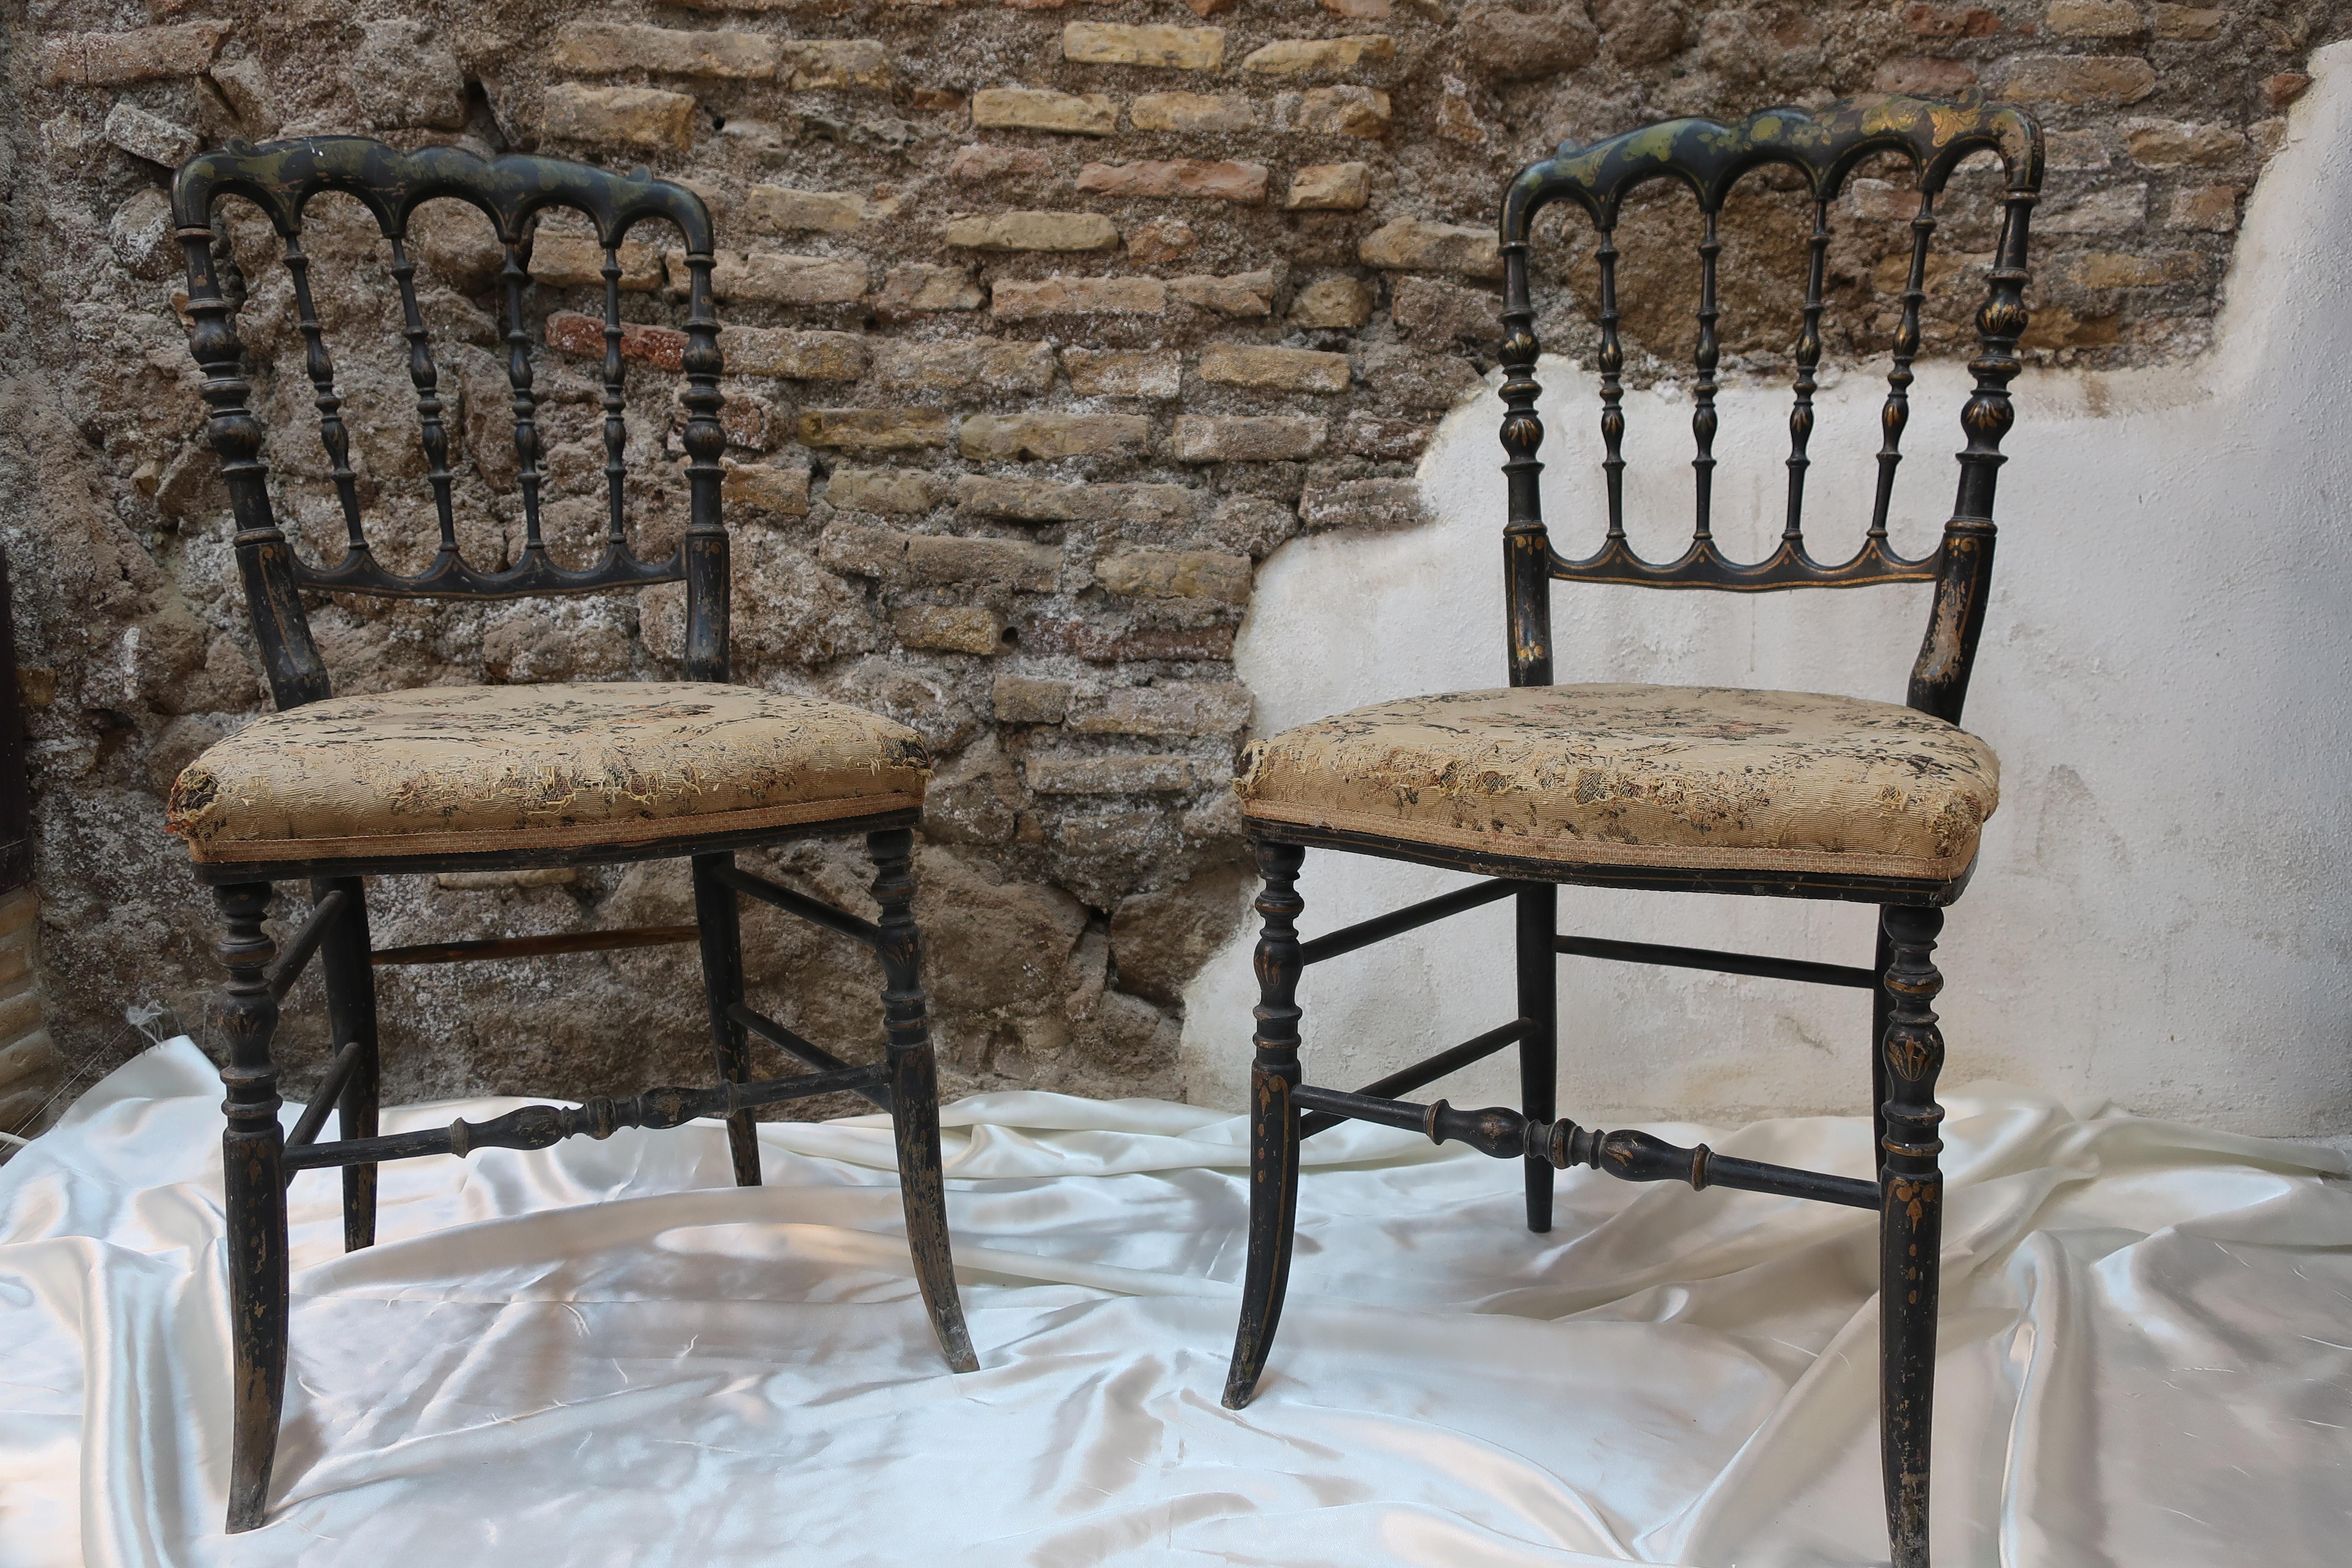 These Italian gorgeous set of two chairs in black lacquer features some beautiful hand painted décor in green and gold.
In Italy, this style was named ‘Chiavari’, typical of the artisanal style of the northern region of Liguria, a true diamond of